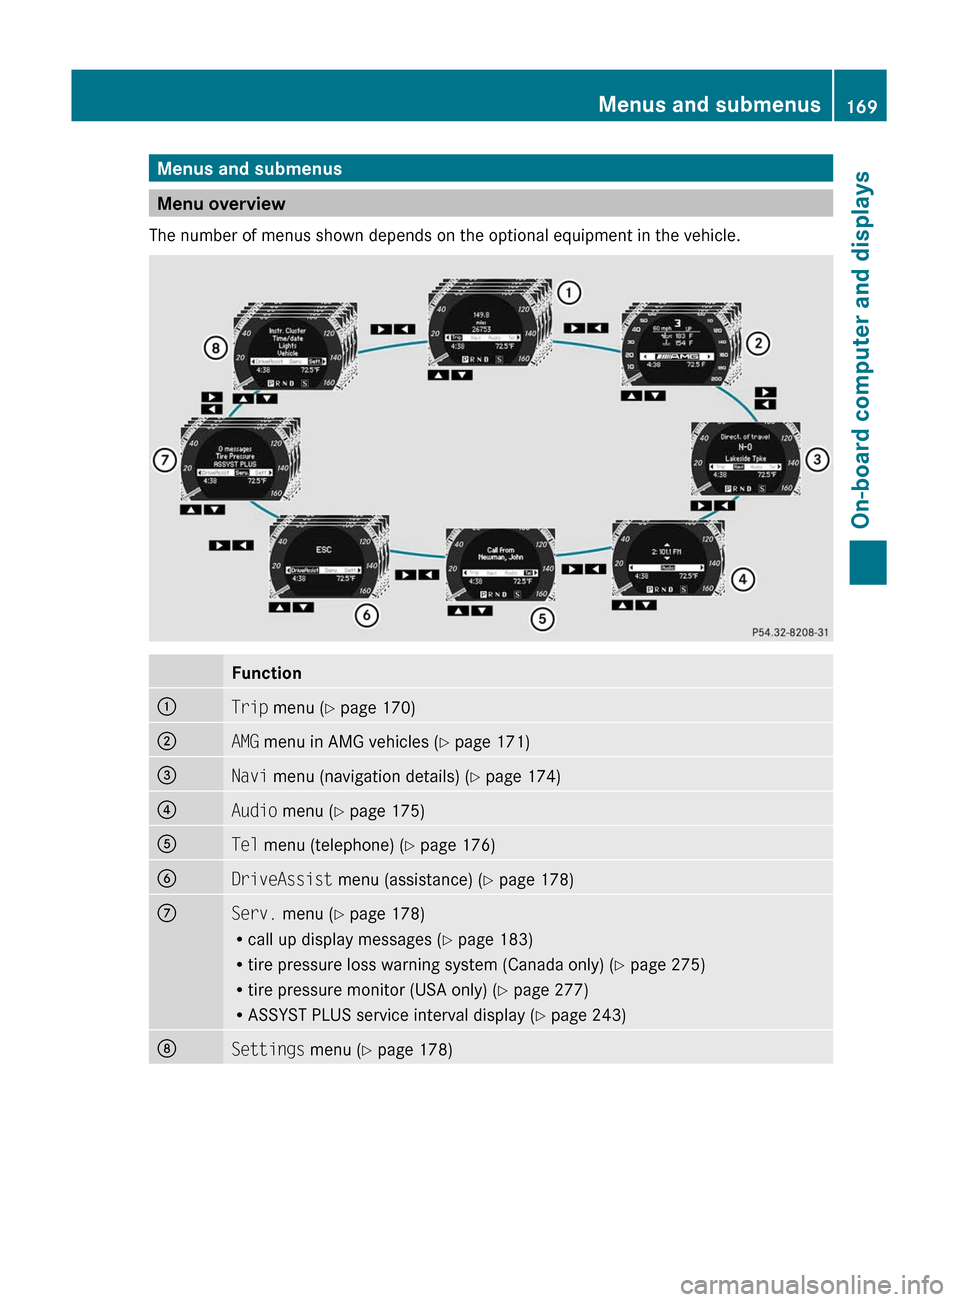 MERCEDES-BENZ C-Class 2011 W204 Owners Manual Menus and submenus
Menu overview
The number of menus shown depends on the optional equipment in the vehicle. 
Function:Trip  menu ( Y page 170);AMG  menu in AMG vehicles ( Y page 171)=Navi  menu (navi